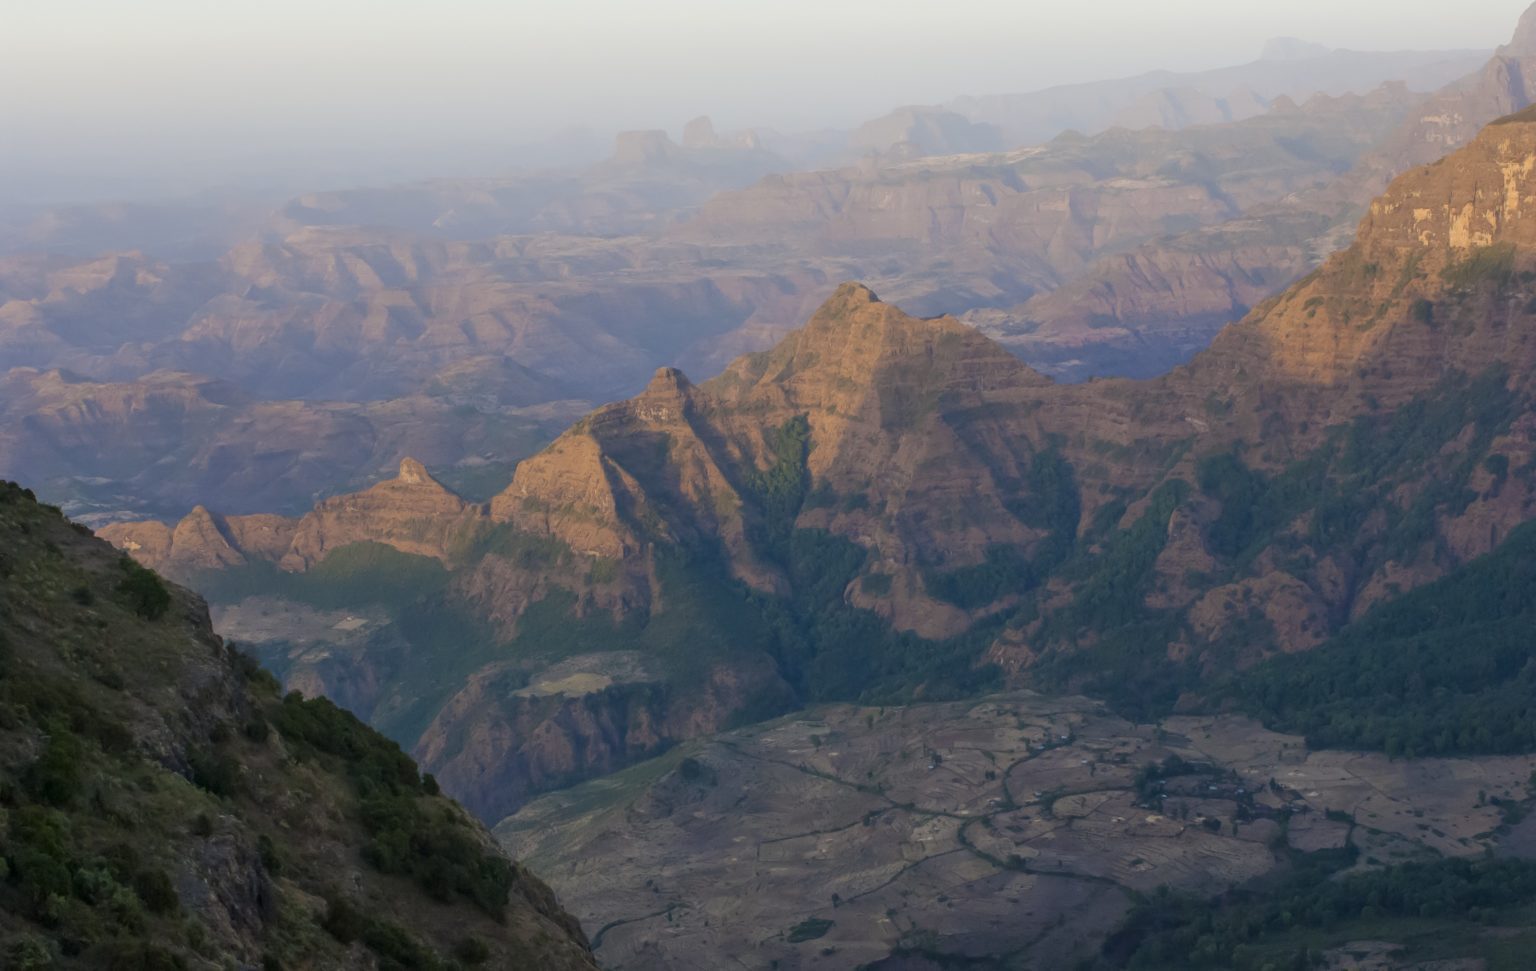 view from high up in the simien mountains on a cloudy day